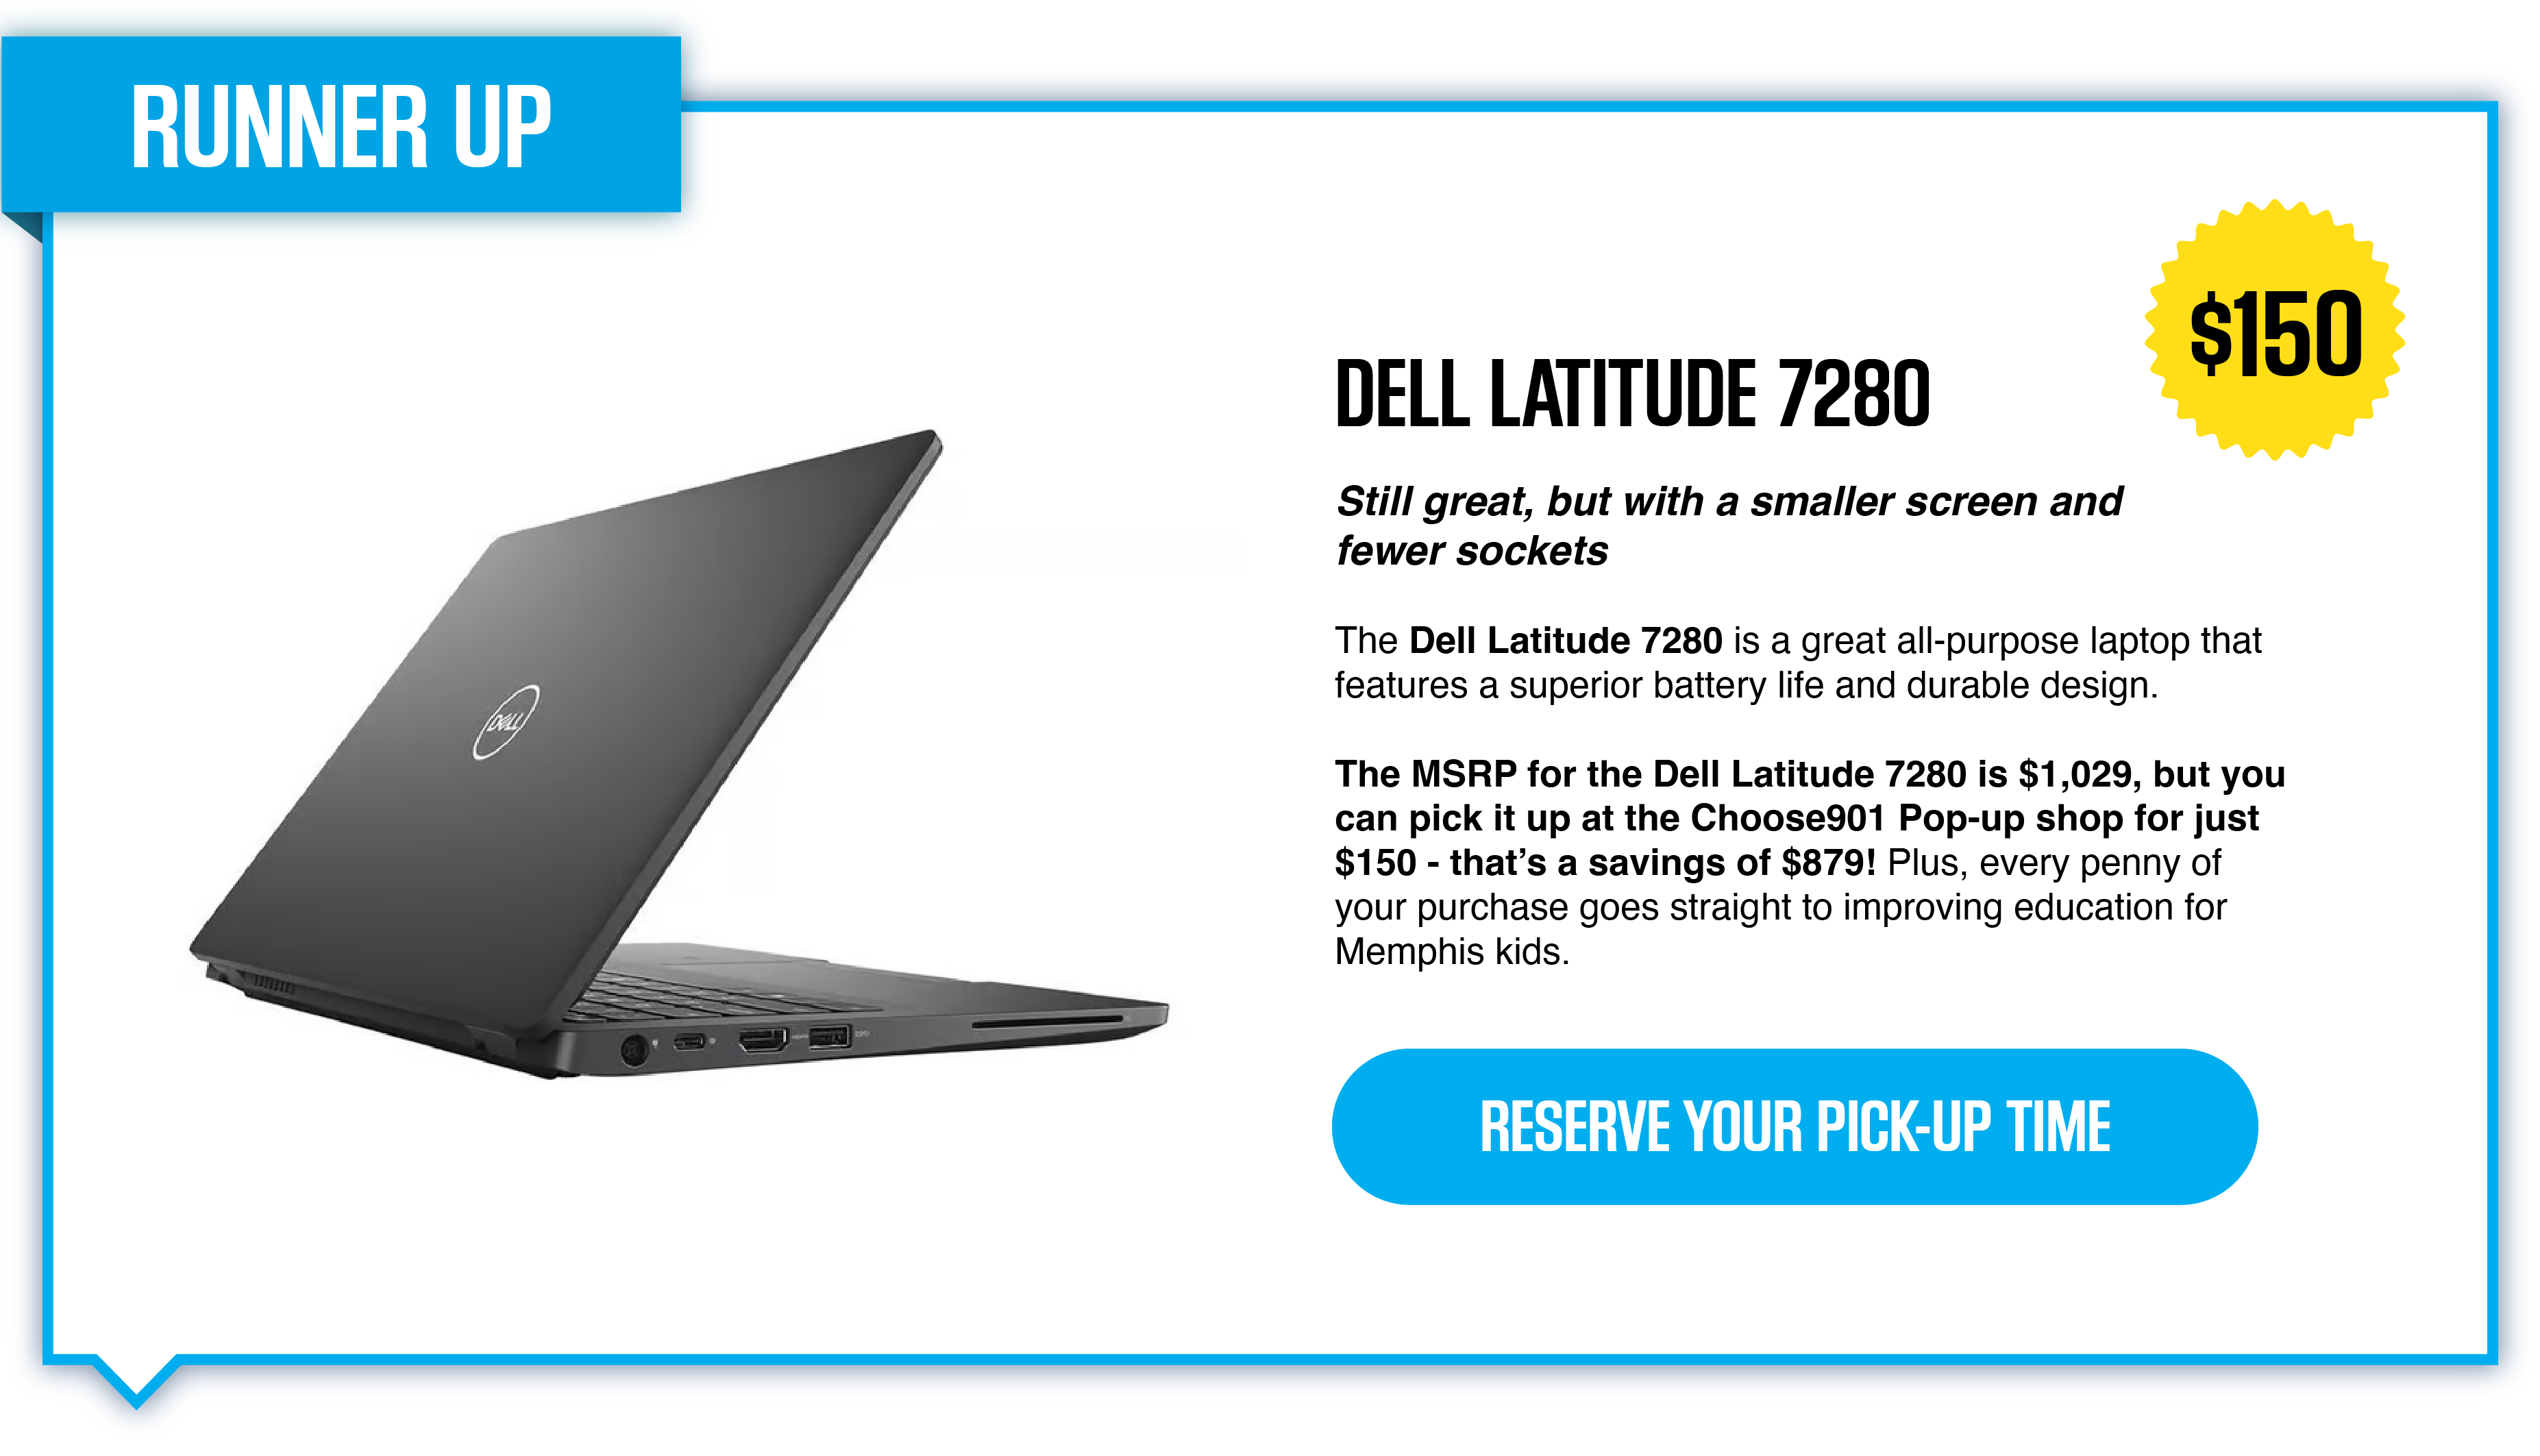 A dell laptop for Computers for a Cause with the word 'runner up' on it.